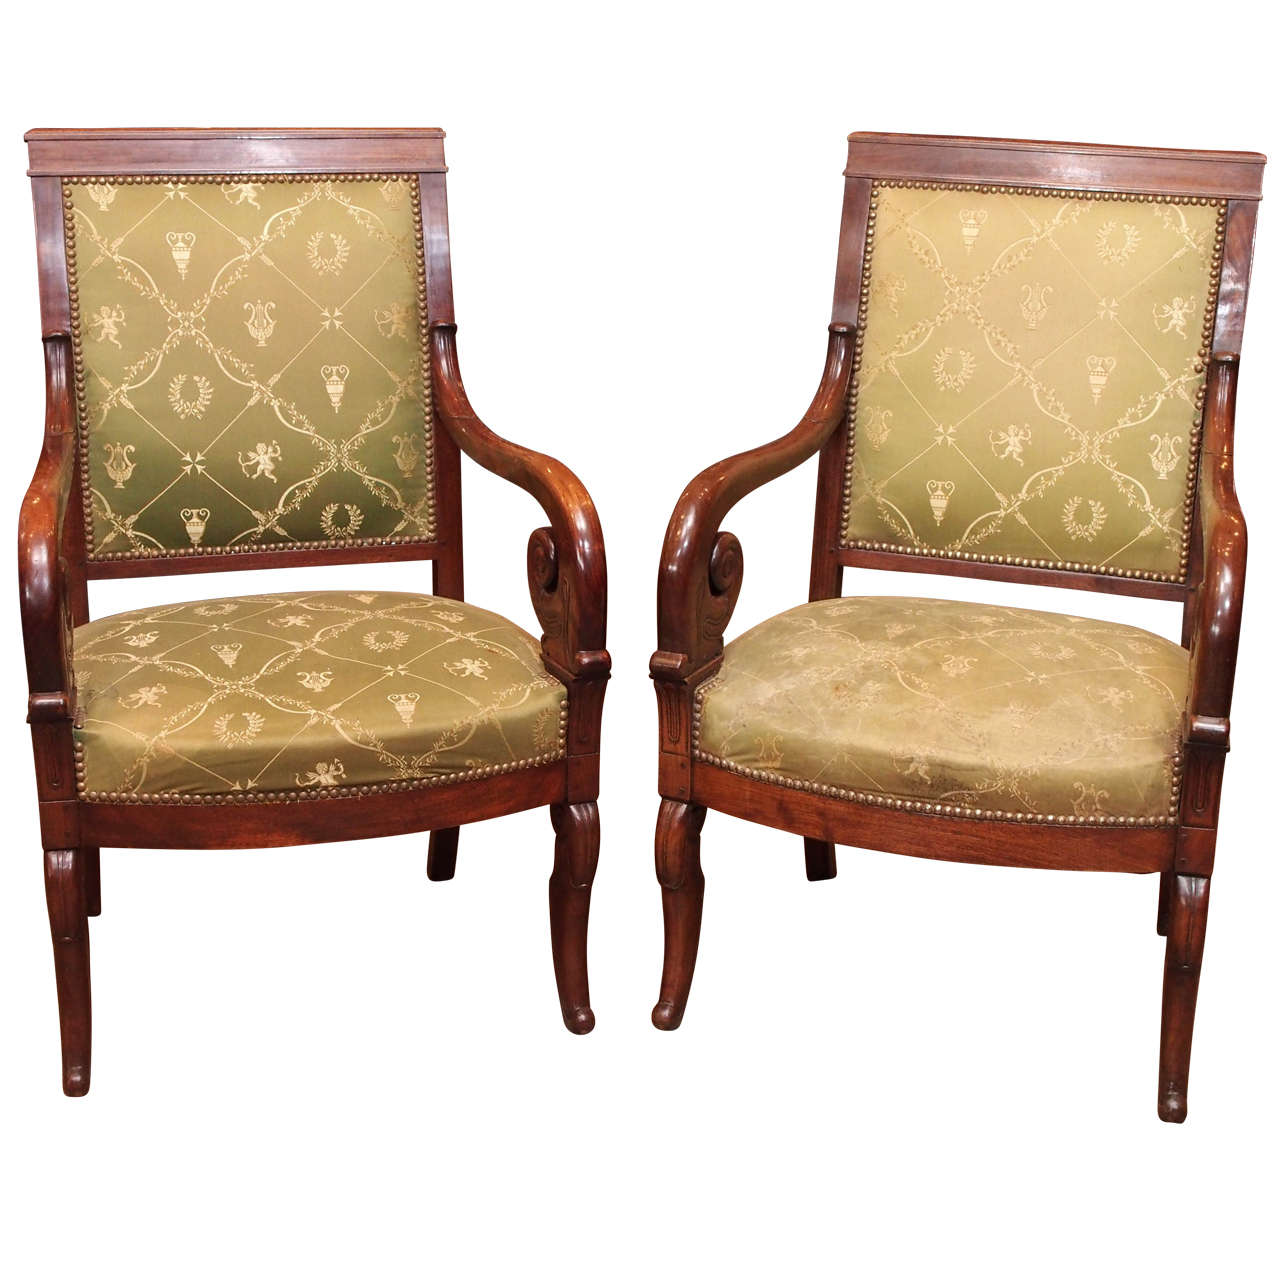 Pair of Fine French Restauration Mahogany Fauteuils